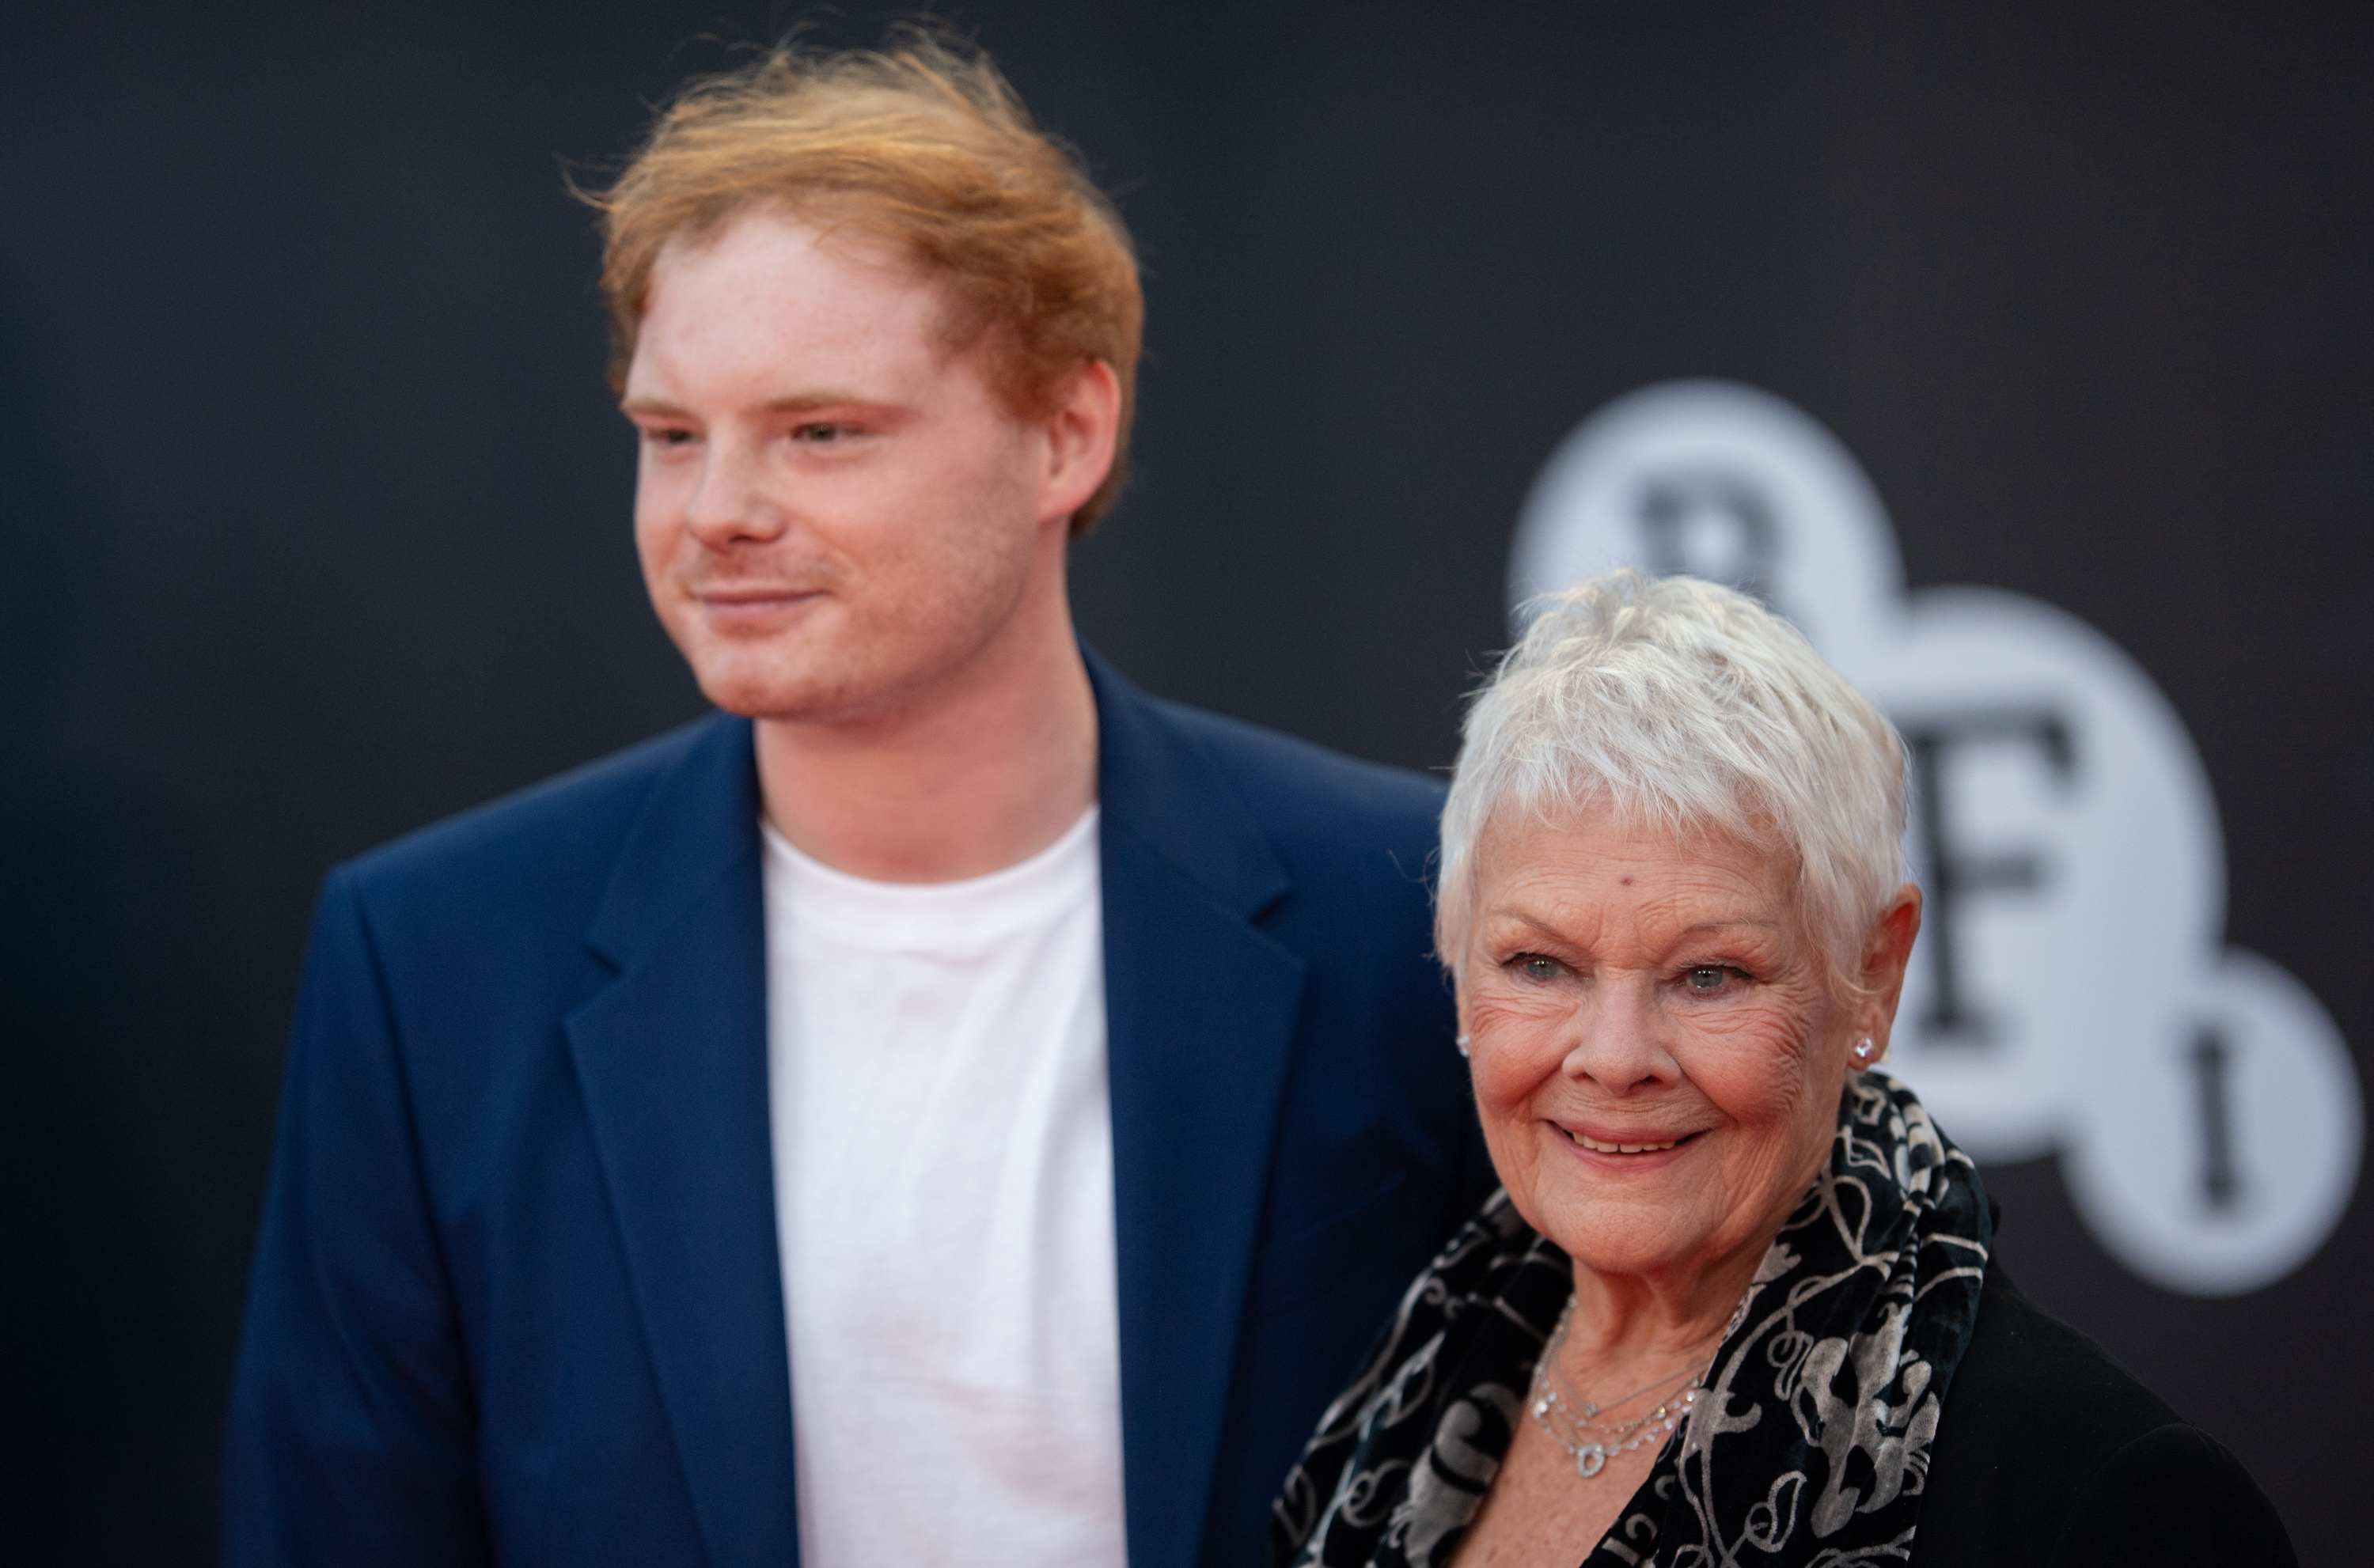 Dame Judi Dench and Sam Williams attend the "No Time To Die" World Premiere at Royal Albert Hall in London, England, on September 28, 2021. | Source: Getty Images